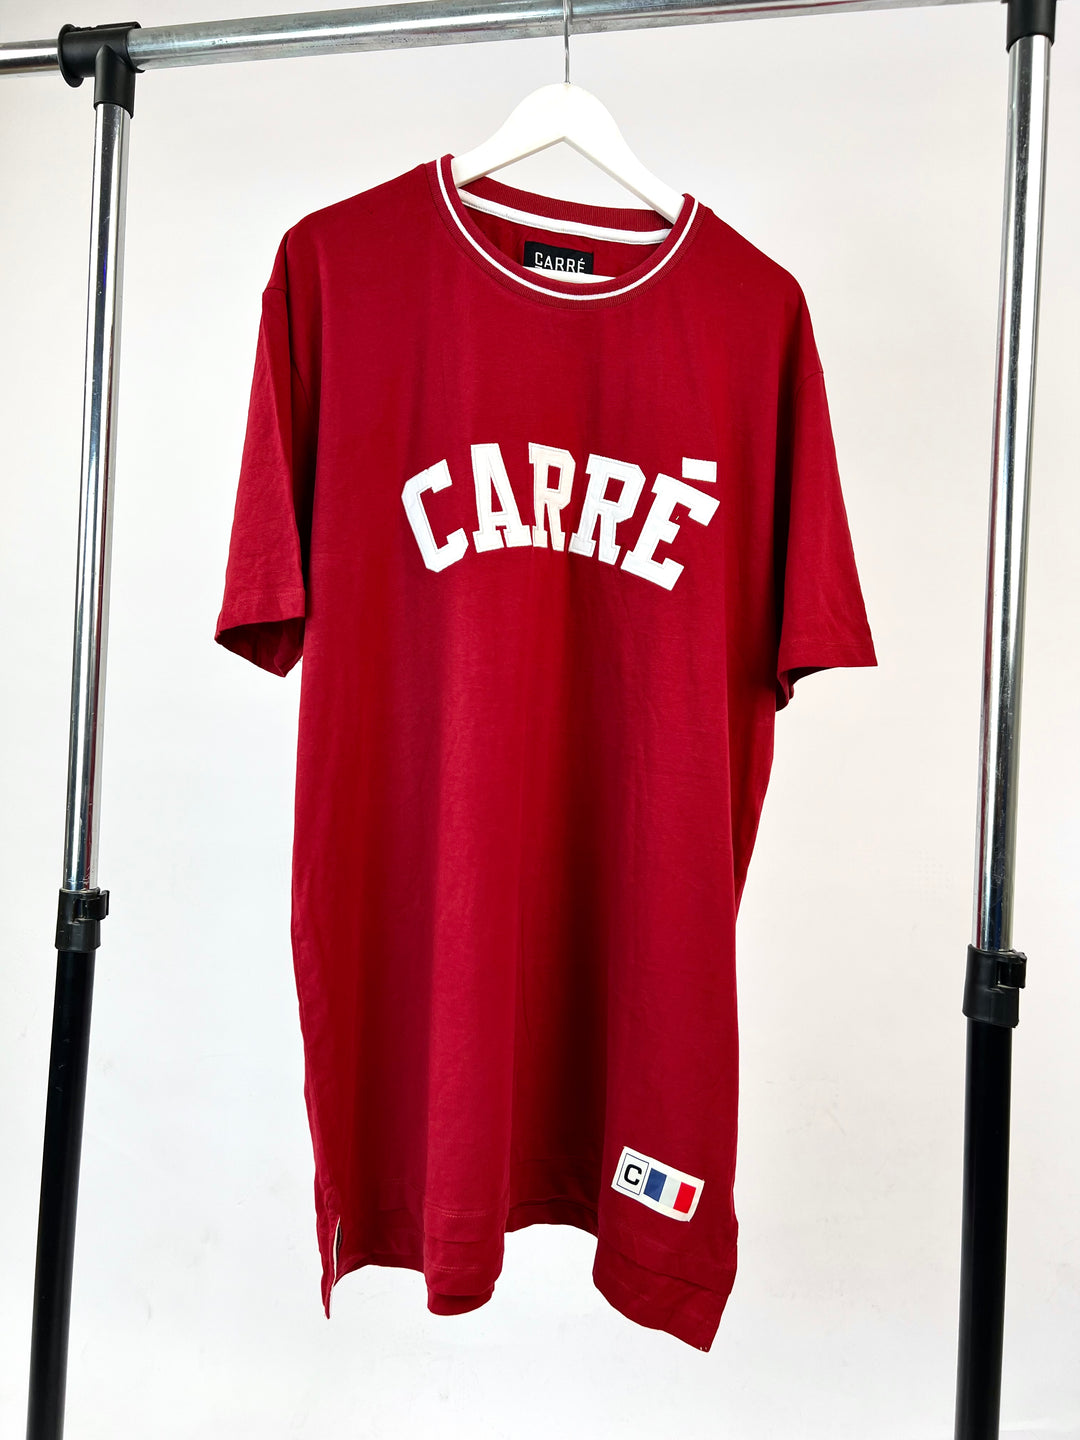 Carre Ringer T-shirt in red